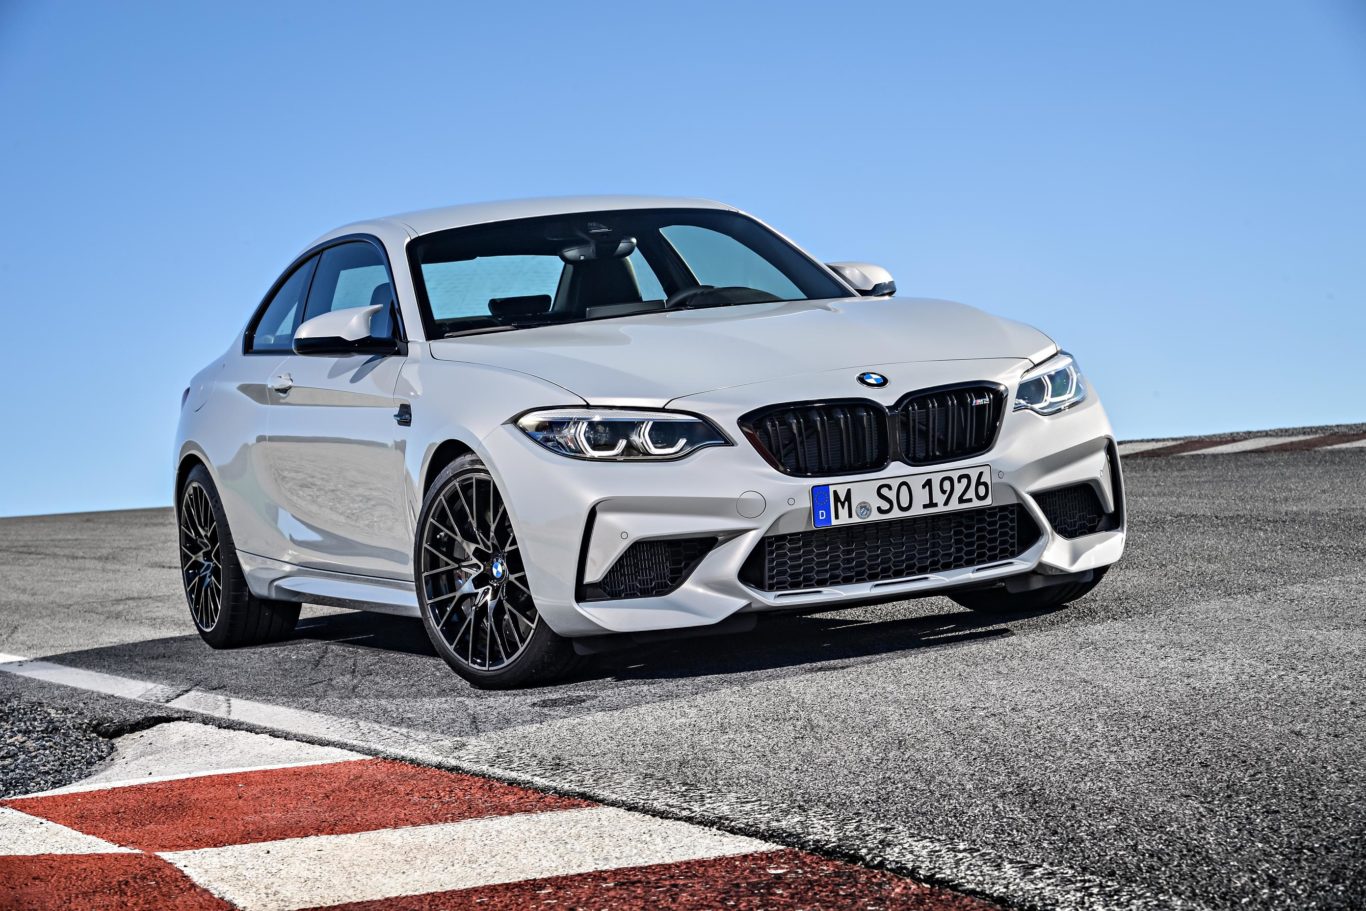 Larger air intakes distinguish the Competition from the older M2